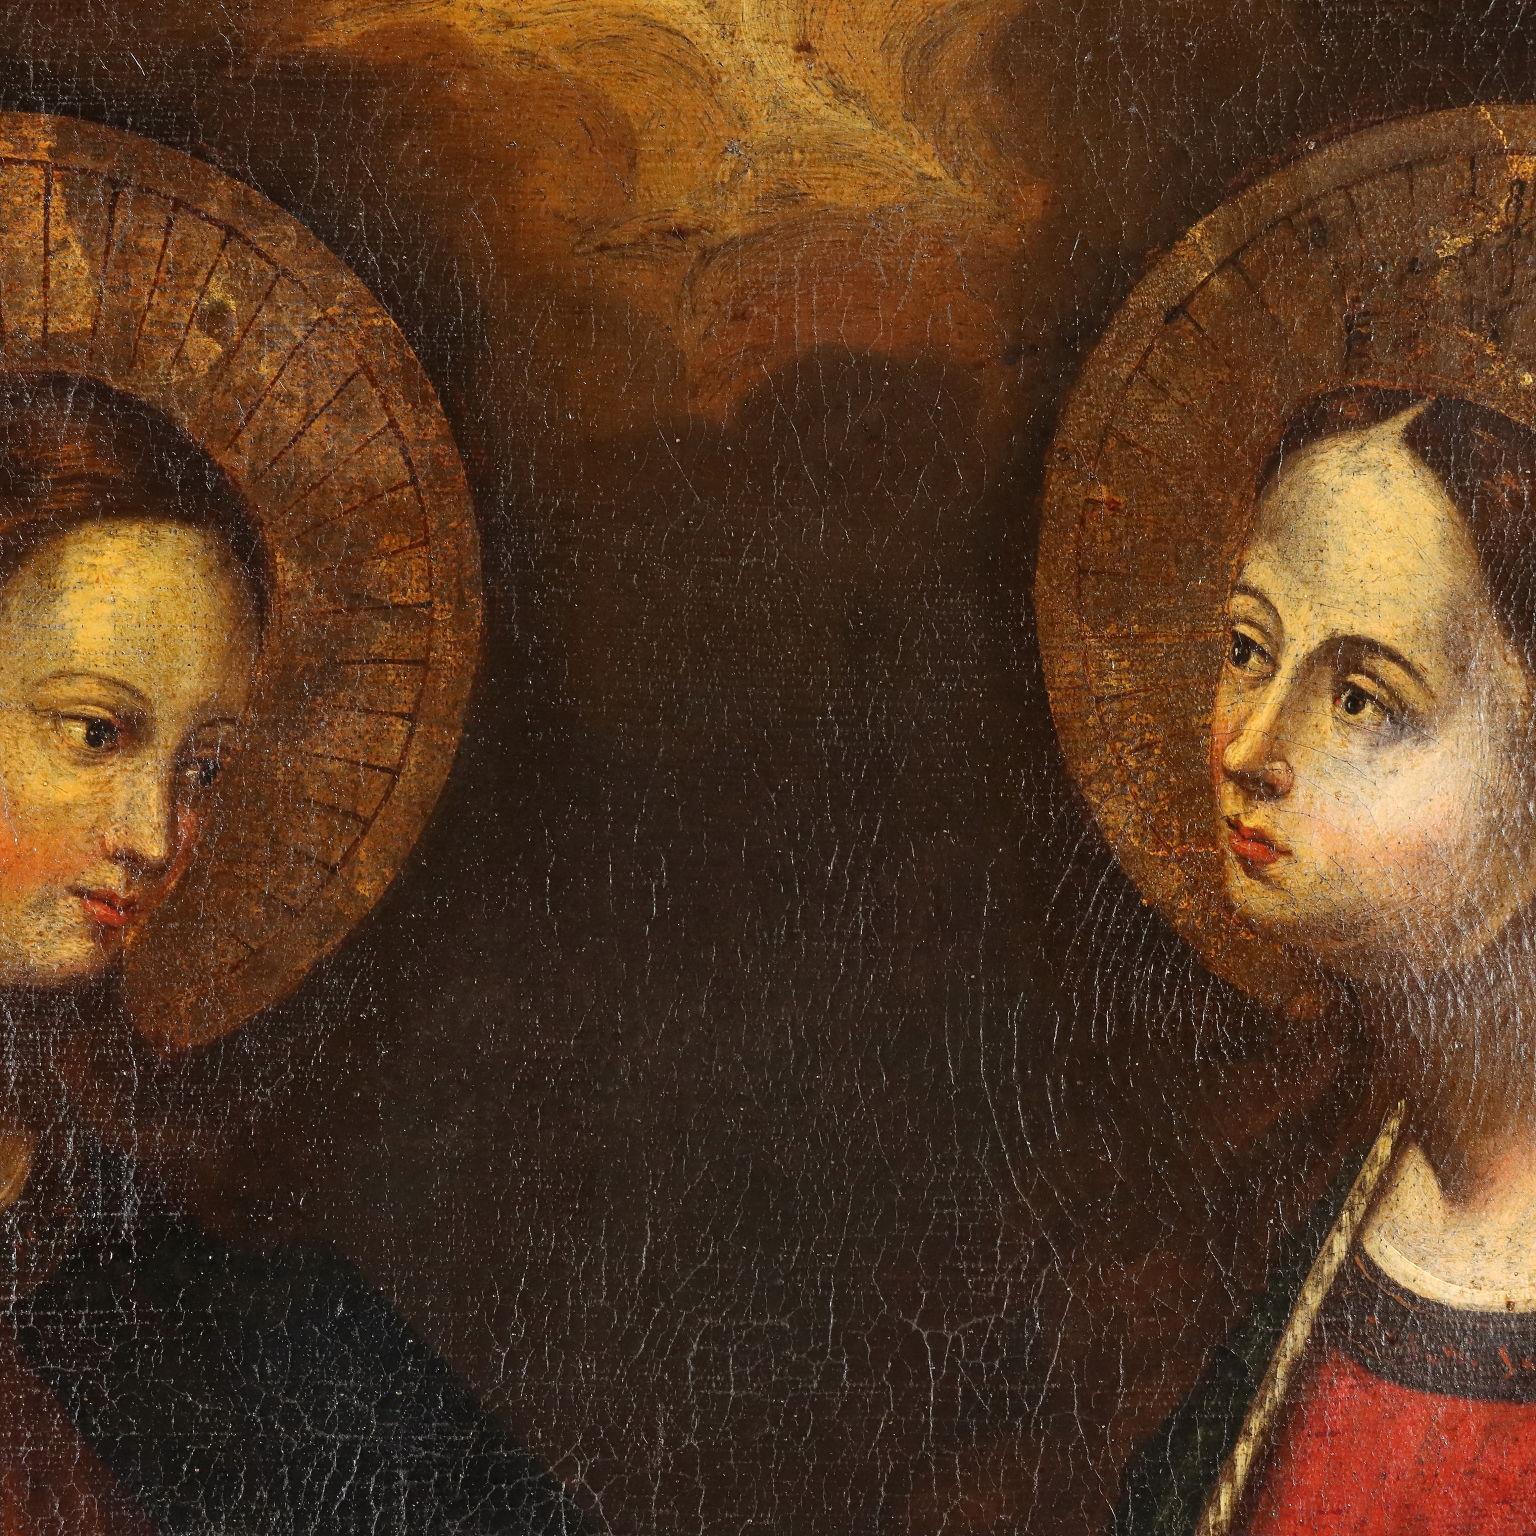 Oil on Canvas.
The painting offers portraits of two saints, half-length: both young and beautiful, the one on the right wears a crown on her head, but no other iconographic signs are present to identify them.
Above them hovers, surrounded by light,